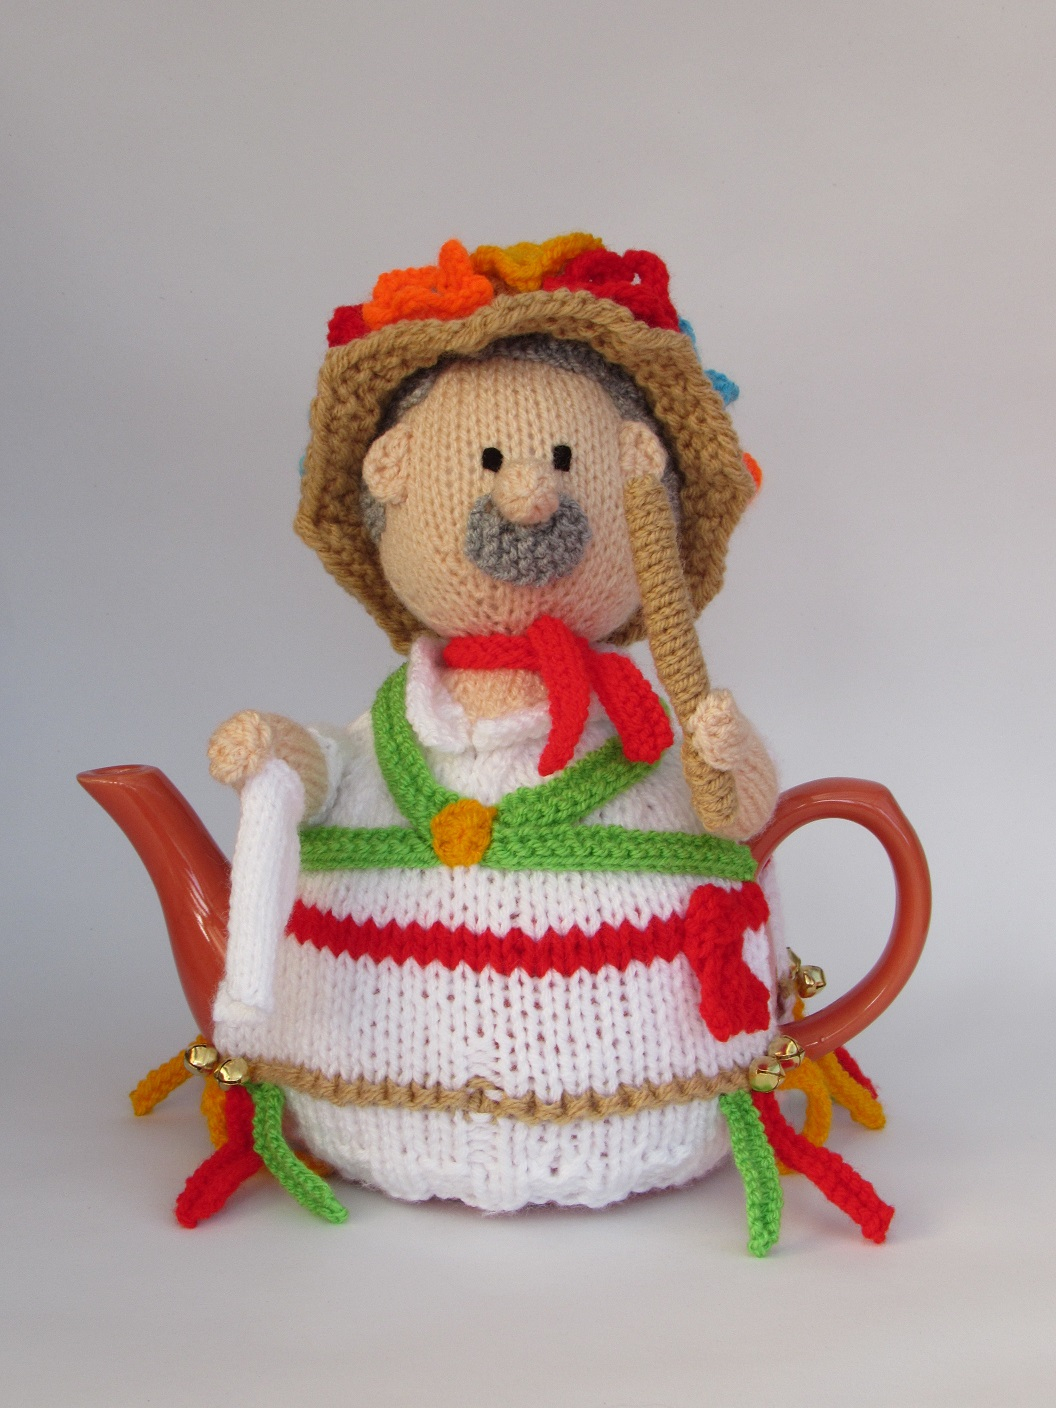 Uk Knitting Patterns Free Online Tea Cosy Knitting Patterns From Tea Cosy Folk Learn How To Knit Our